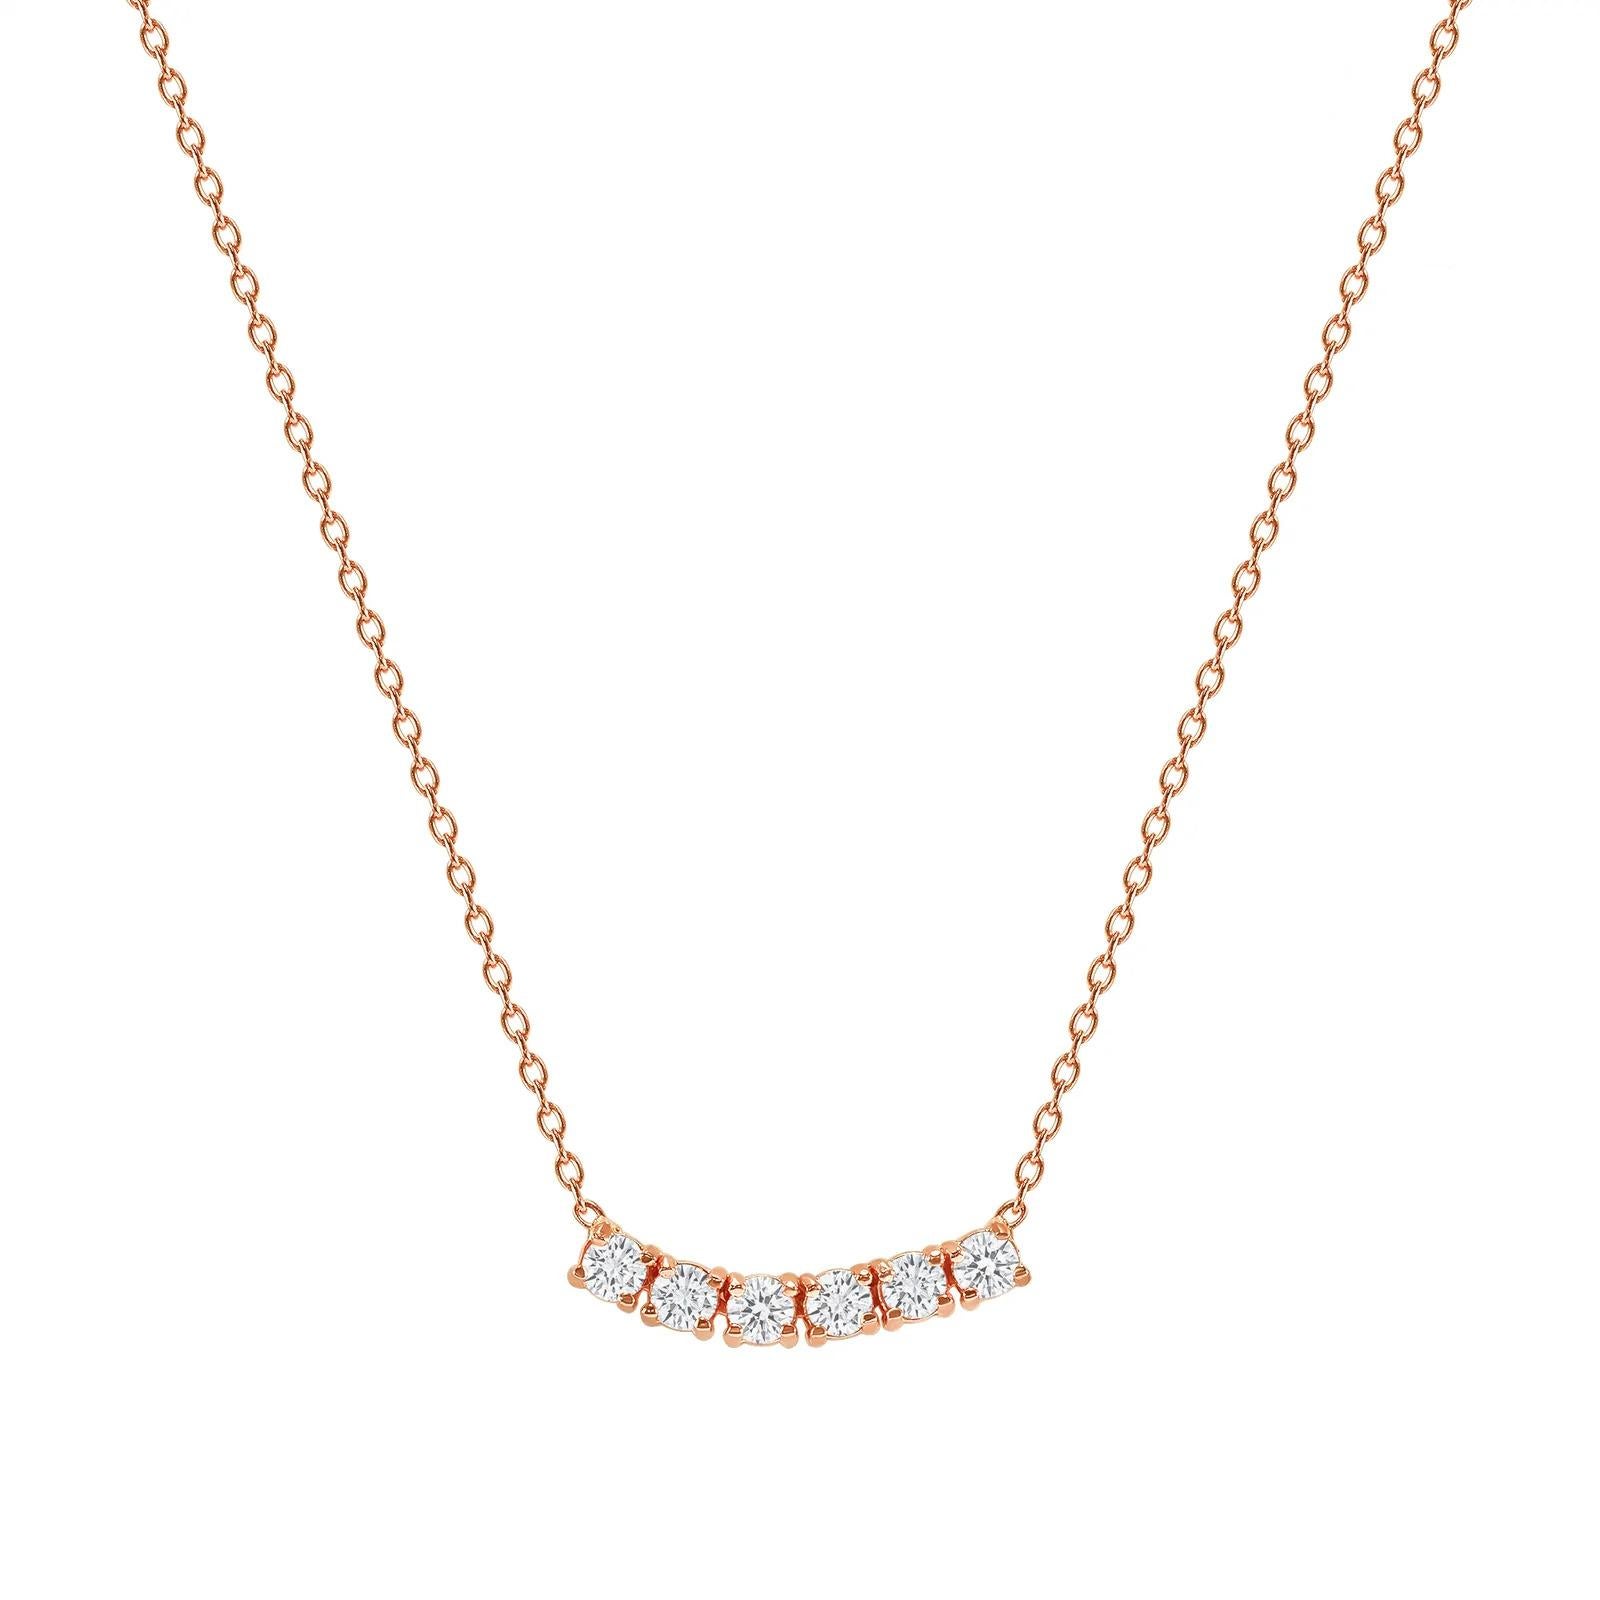 This petite, curved diamond necklace is crafted with gorgeous 14k gold set with six round diamonds.  

Gold: 14k 
Diamond Total Carats: 0.50 ct
Diamond Cut: Round (6 diamonds)
Diamond Clarity: VS
Diamond Color: F
Color: Rose Gold
Necklace Length: 20